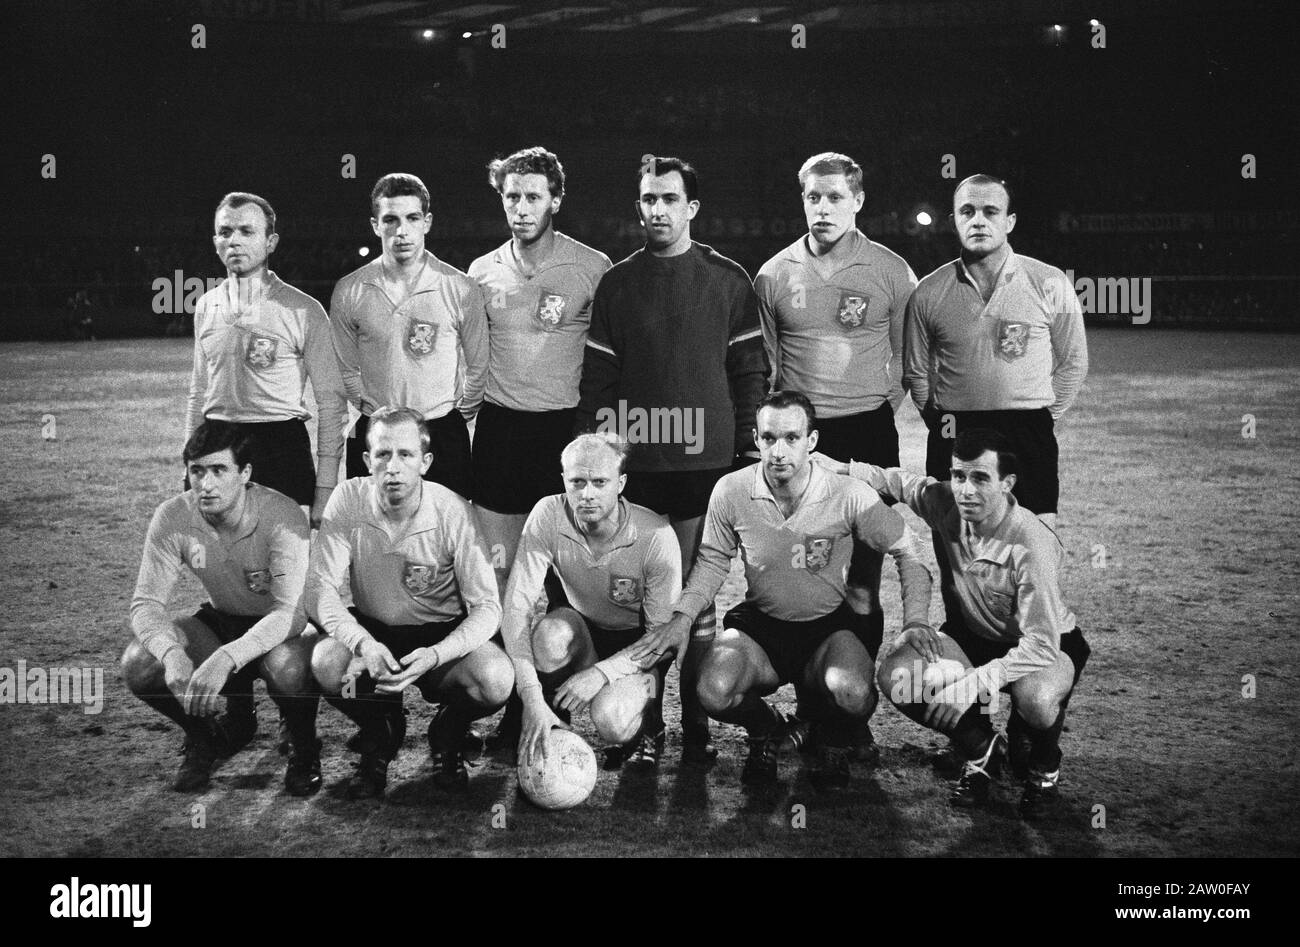 Netherlands against France 1-0. Nr. 8 and 9 Dutch national team, No. 10 Erase with French captain /. Date: April 17, 1963 Keywords: sport, football Stock Photo